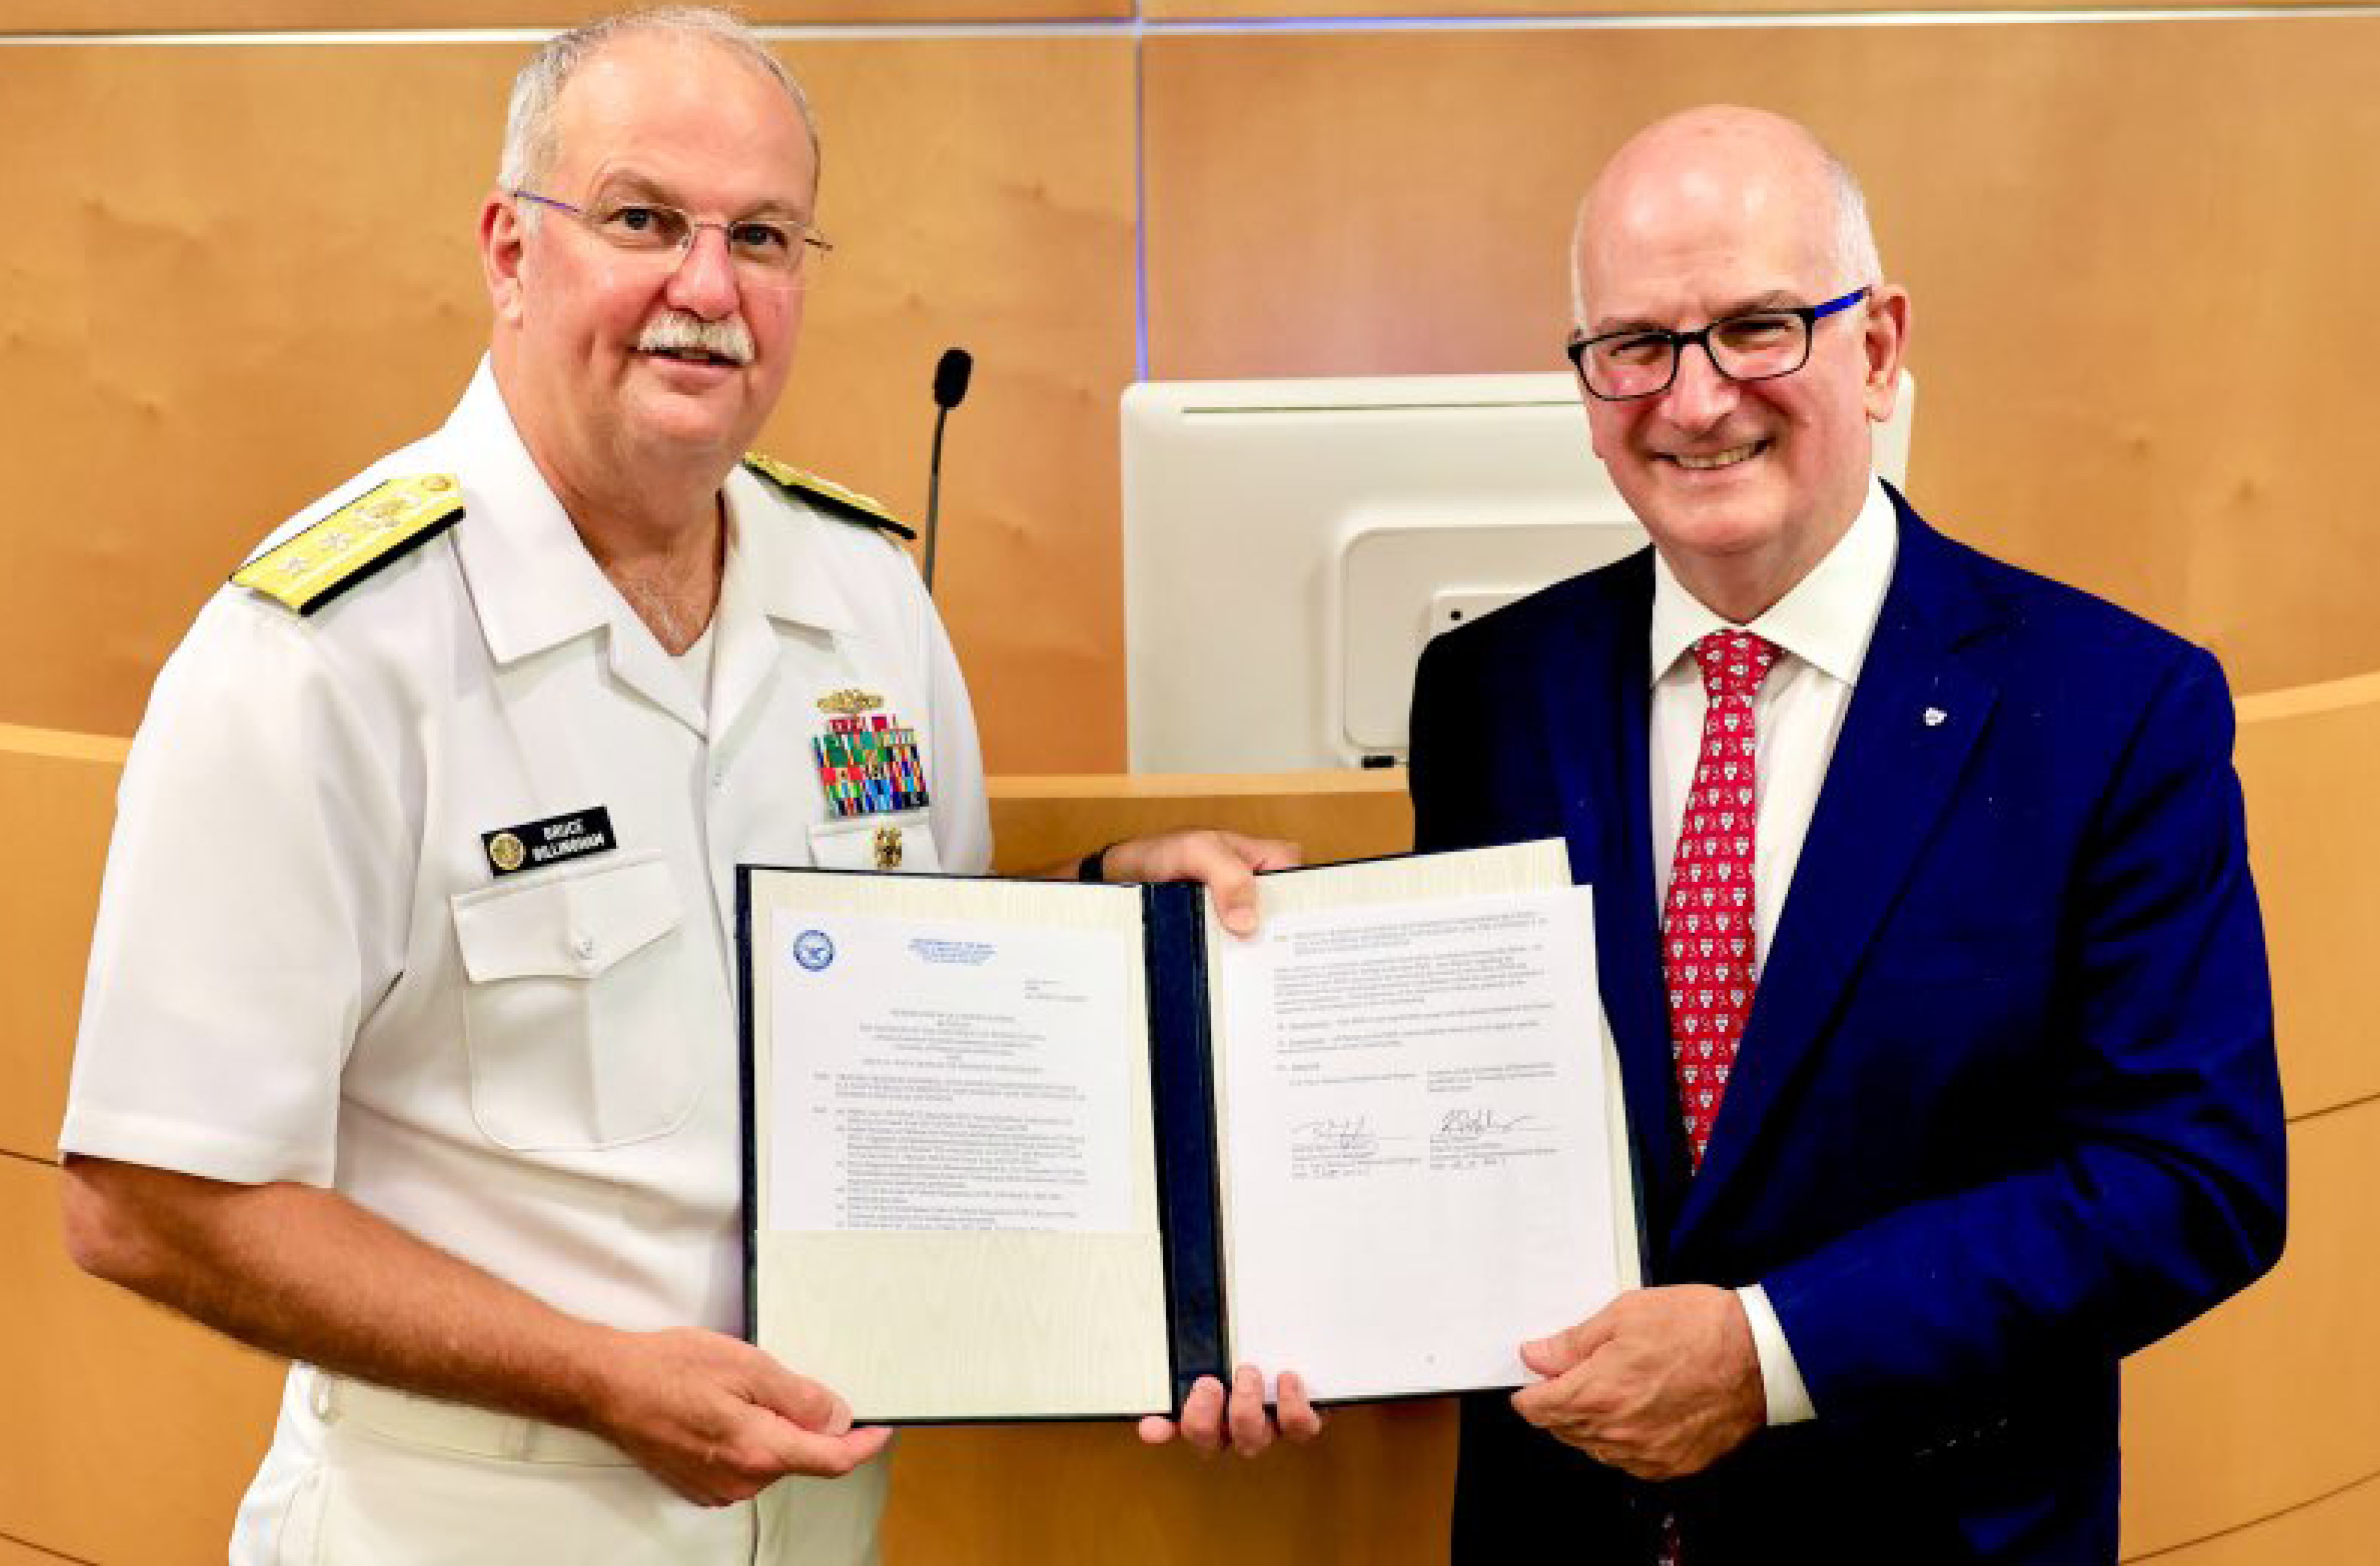 Kevin Mahoney and Rear Admiral Bruce Gillingham, Navy Surgeon General, display the signed partnership agreement